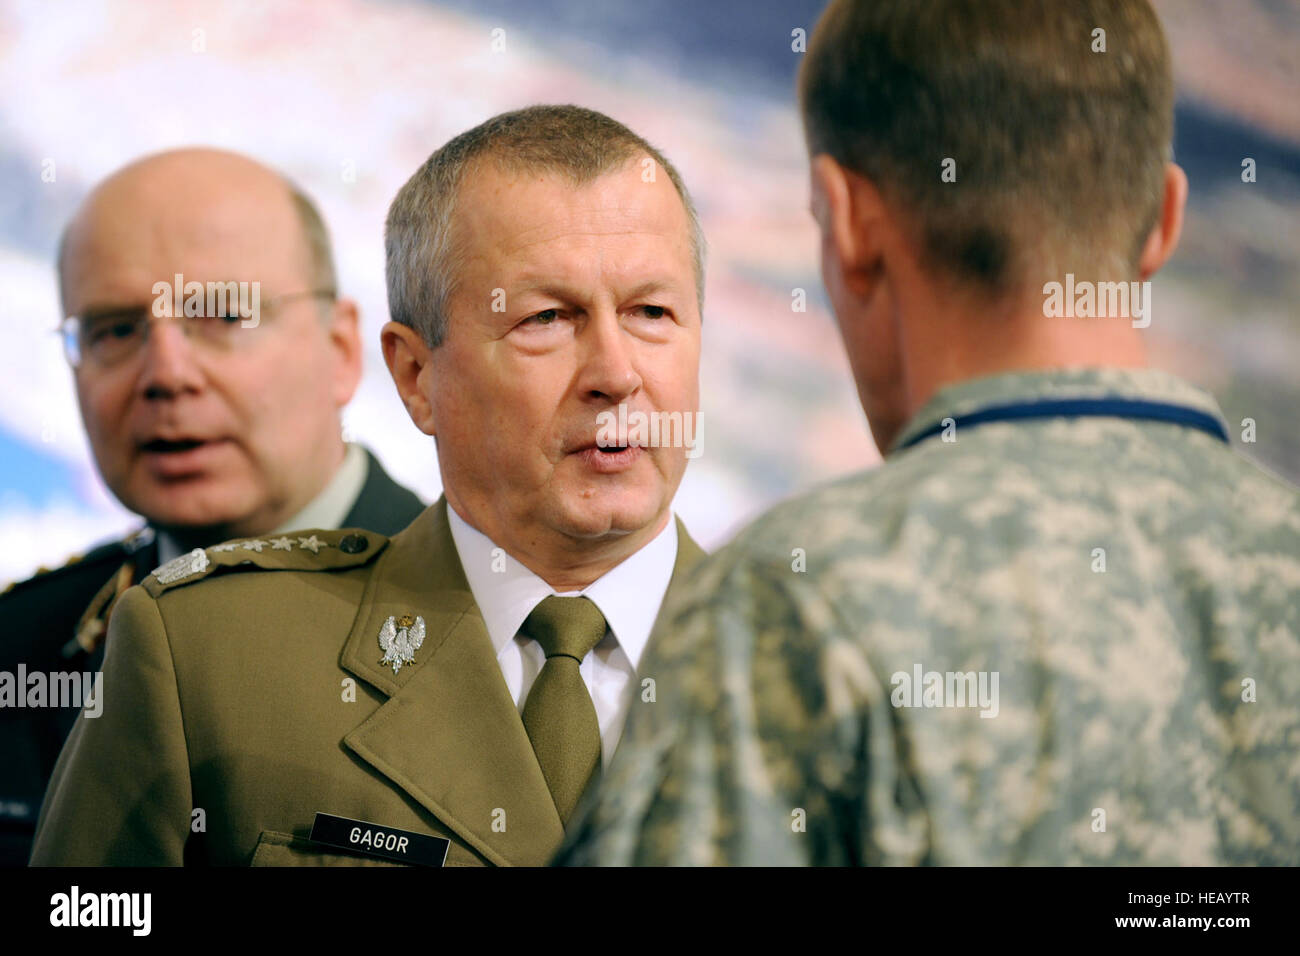 Chief of General Staff of the Polish Armed Forces Gen. Franciszek Gagor speaks with U.S. Army Gen. Stanley McChrystal, commander of the International Security Assistance Force (ISAF) and commander of U.S. Forces in Afghanistan, during the NATO Defense Ministerial in Istanbul, Turkey, Feb. 5, 2010.  Cherie Cullen Stock Photo